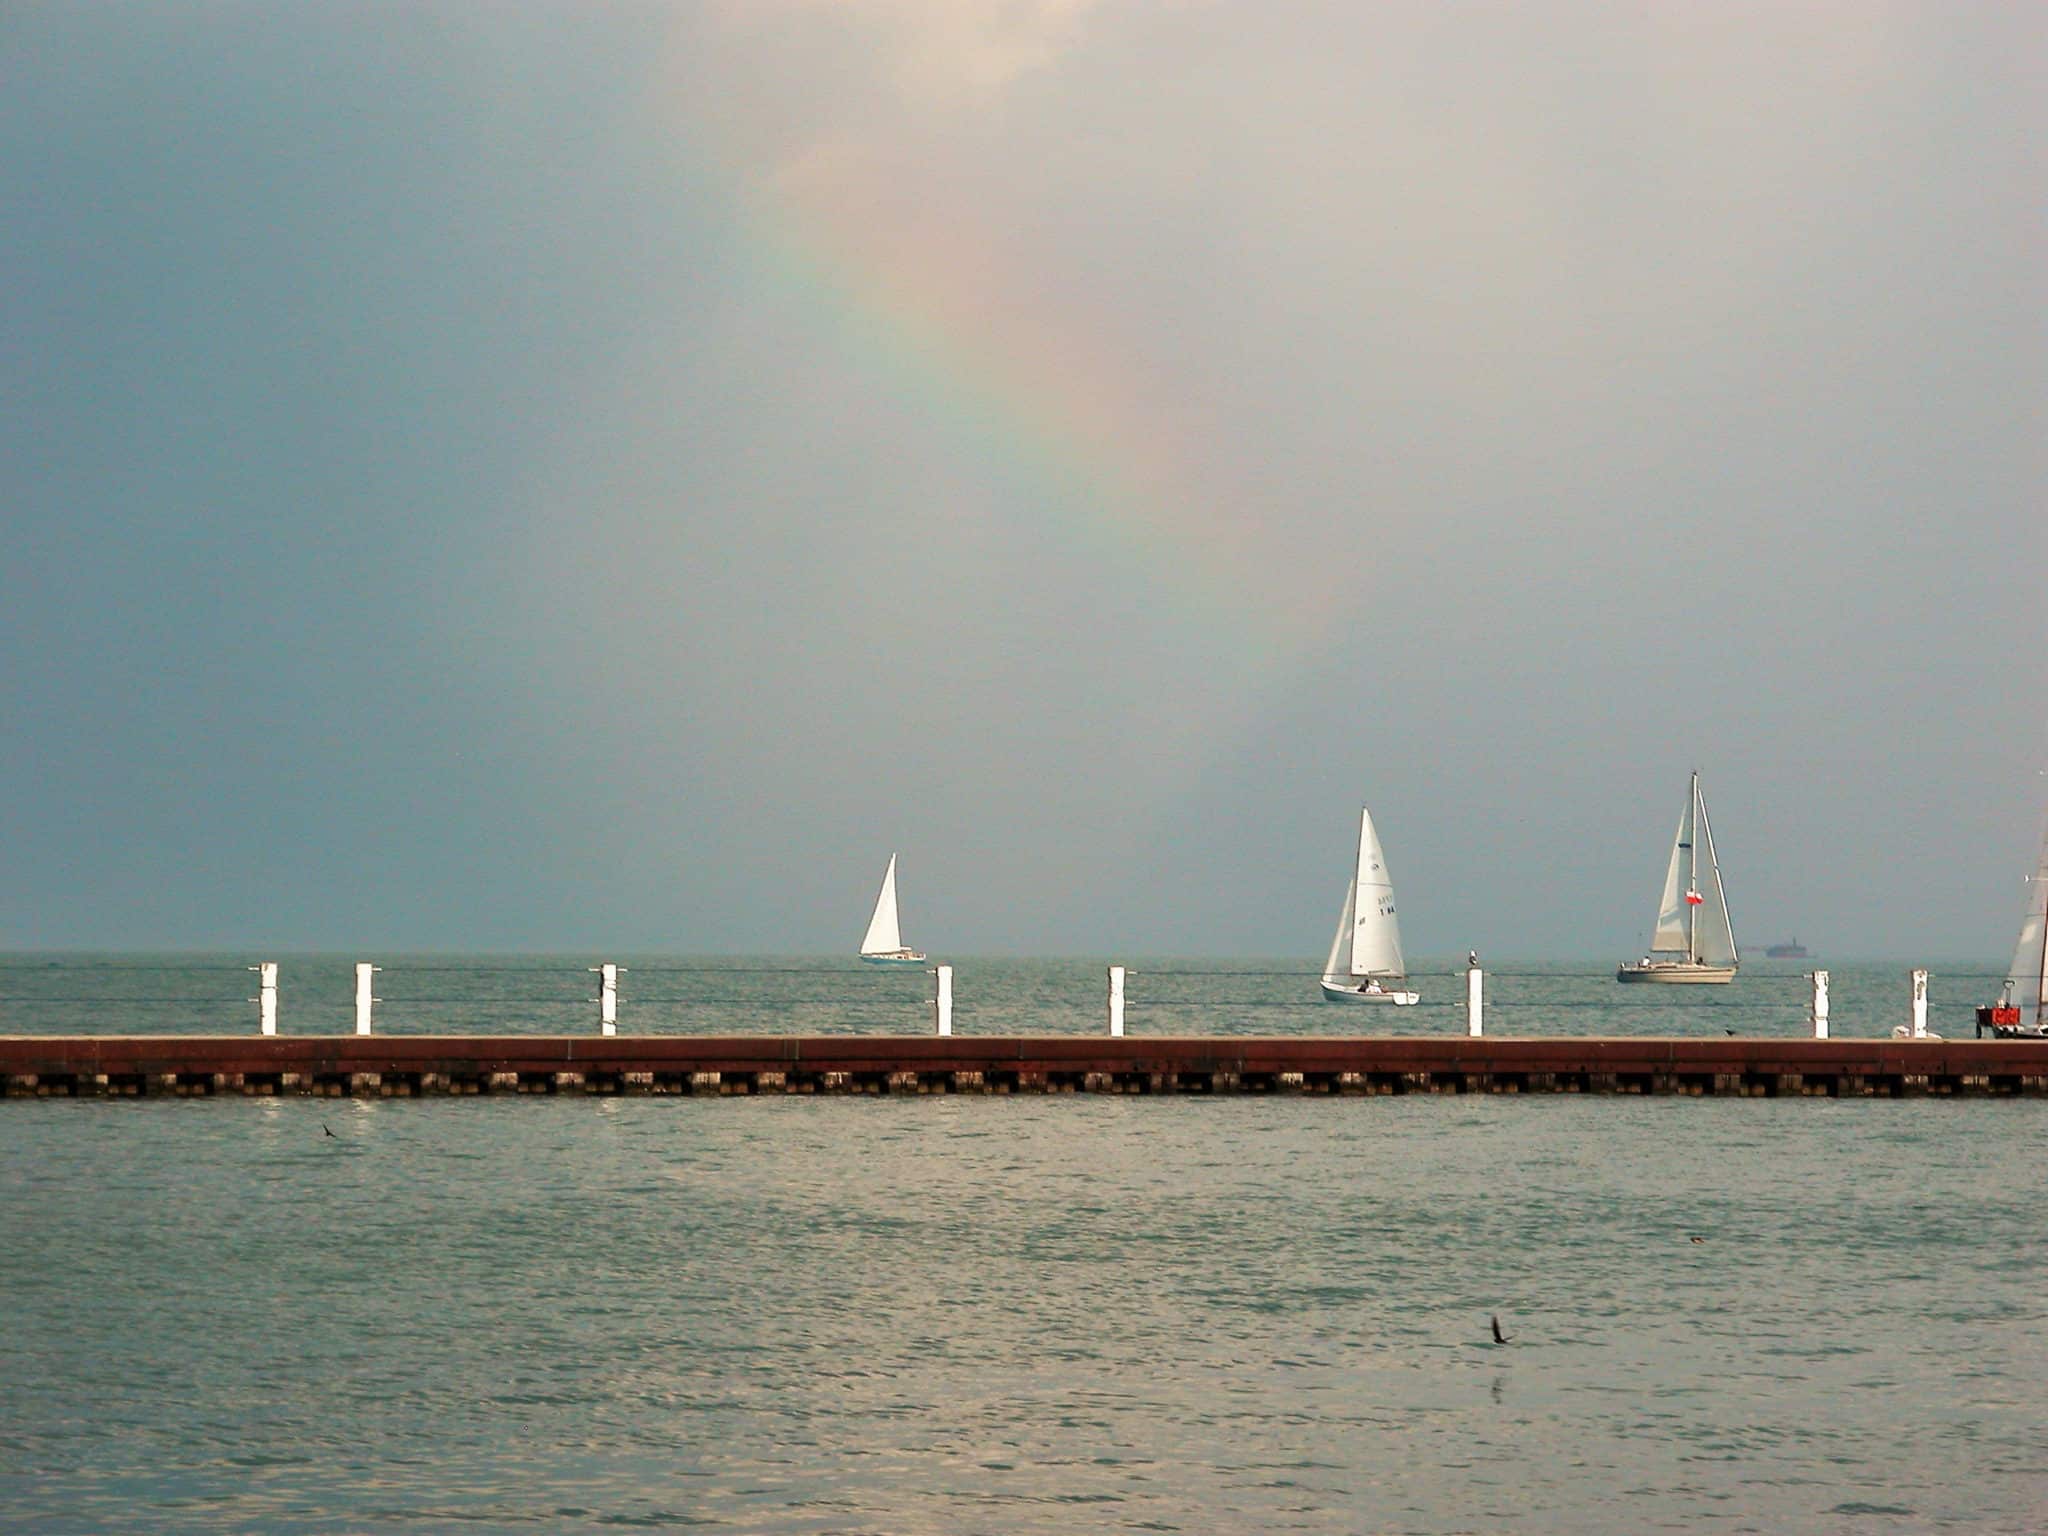 Montrose beach in Chicago with sailboats in the water next to a long pier